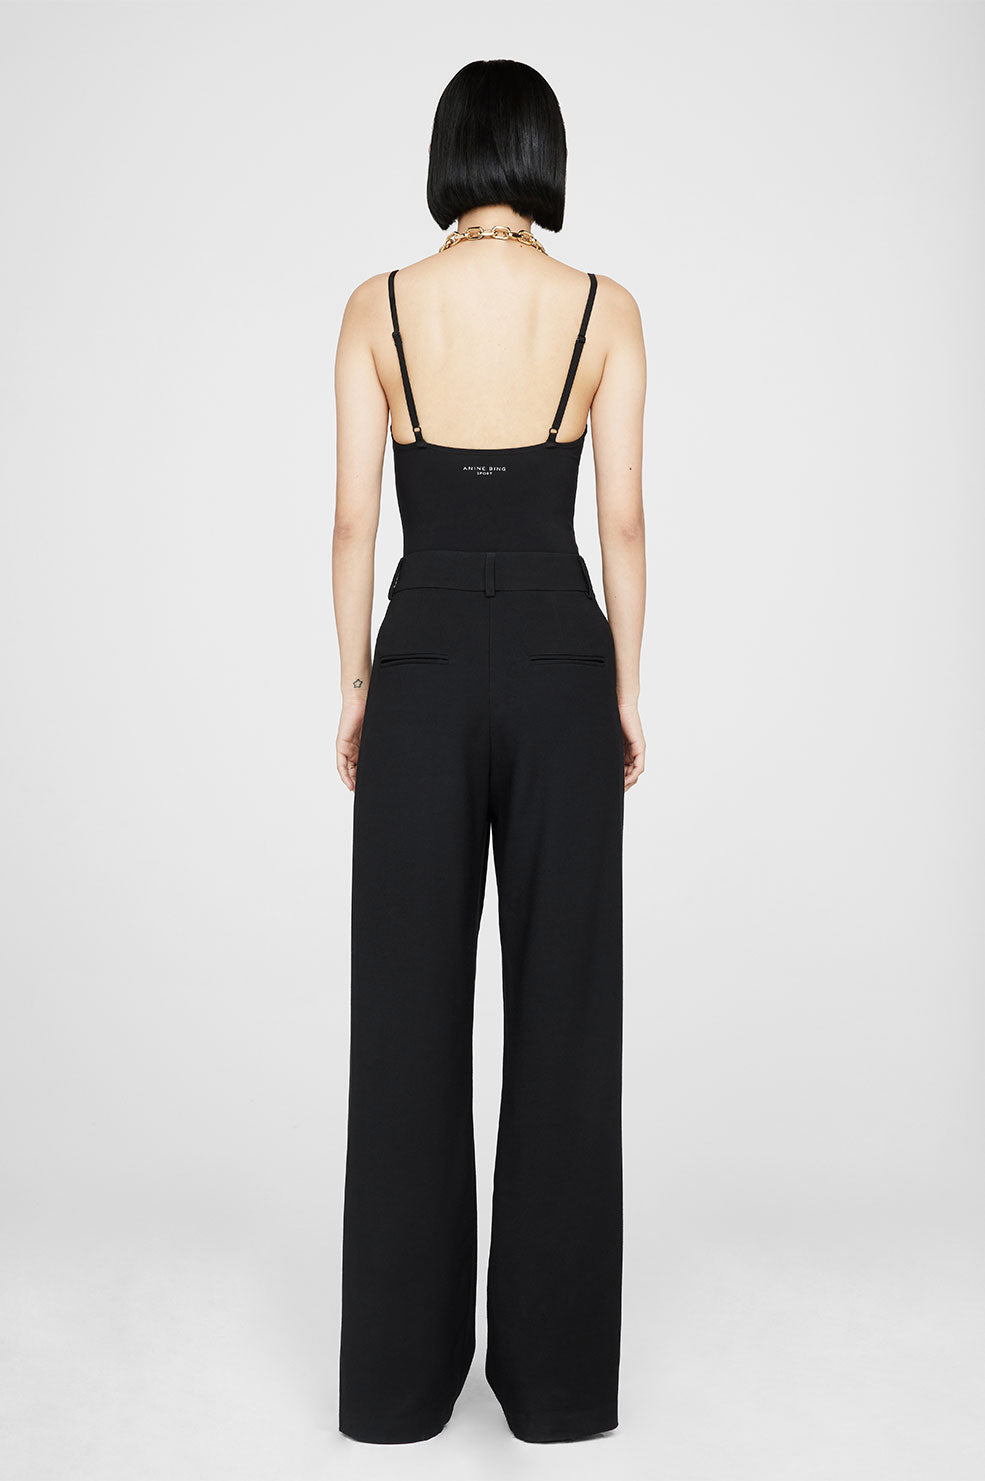 ANINE BING Carrie Pant - Black Twill - On Model Back